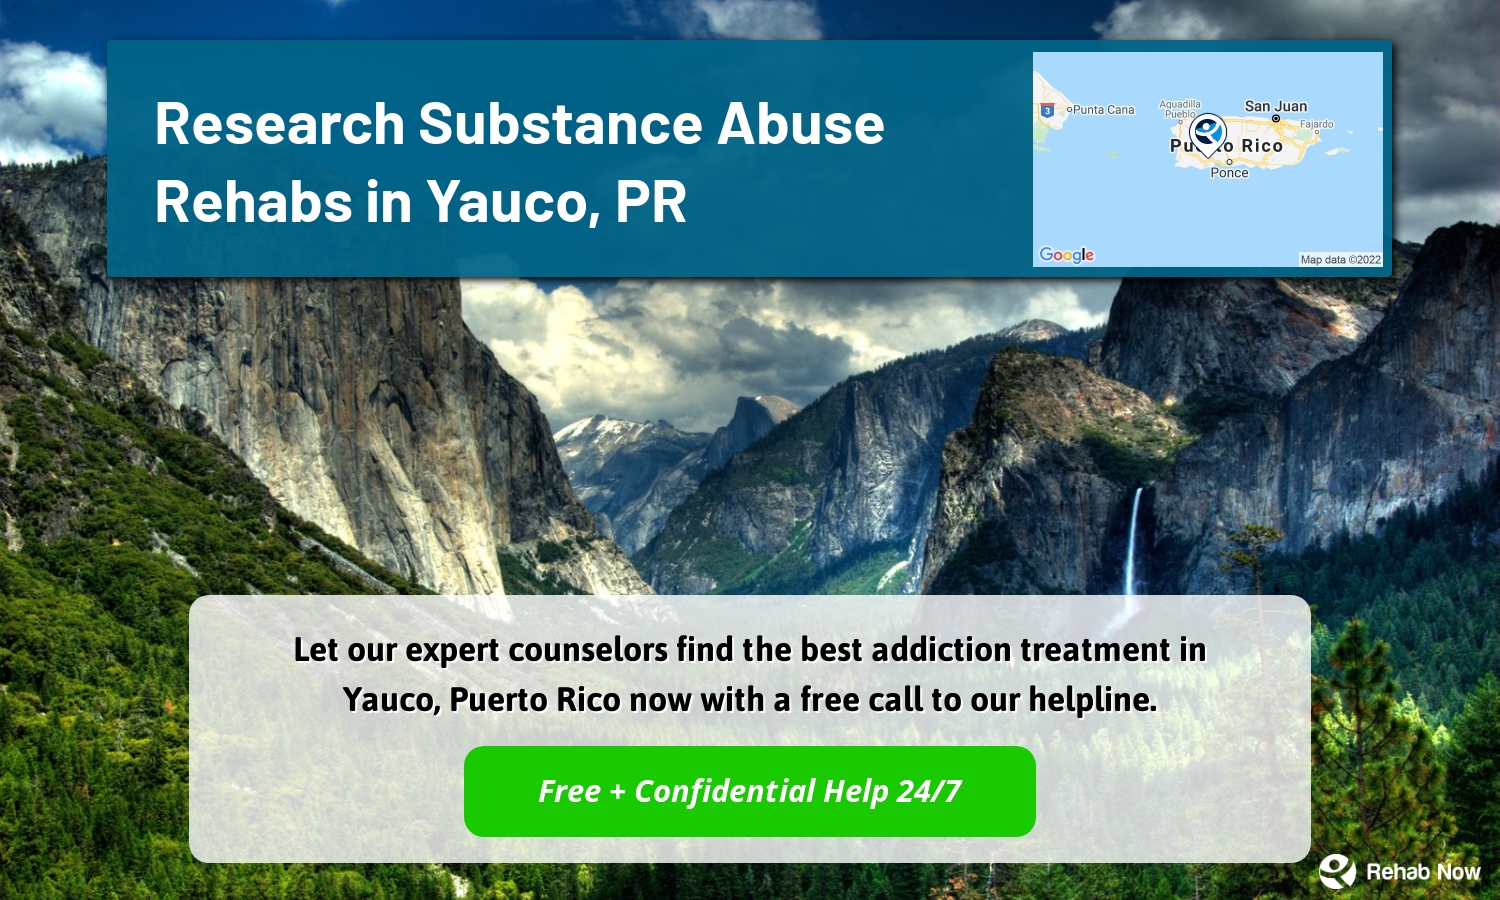 Let our expert counselors find the best addiction treatment in Yauco, Puerto Rico now with a free call to our helpline.